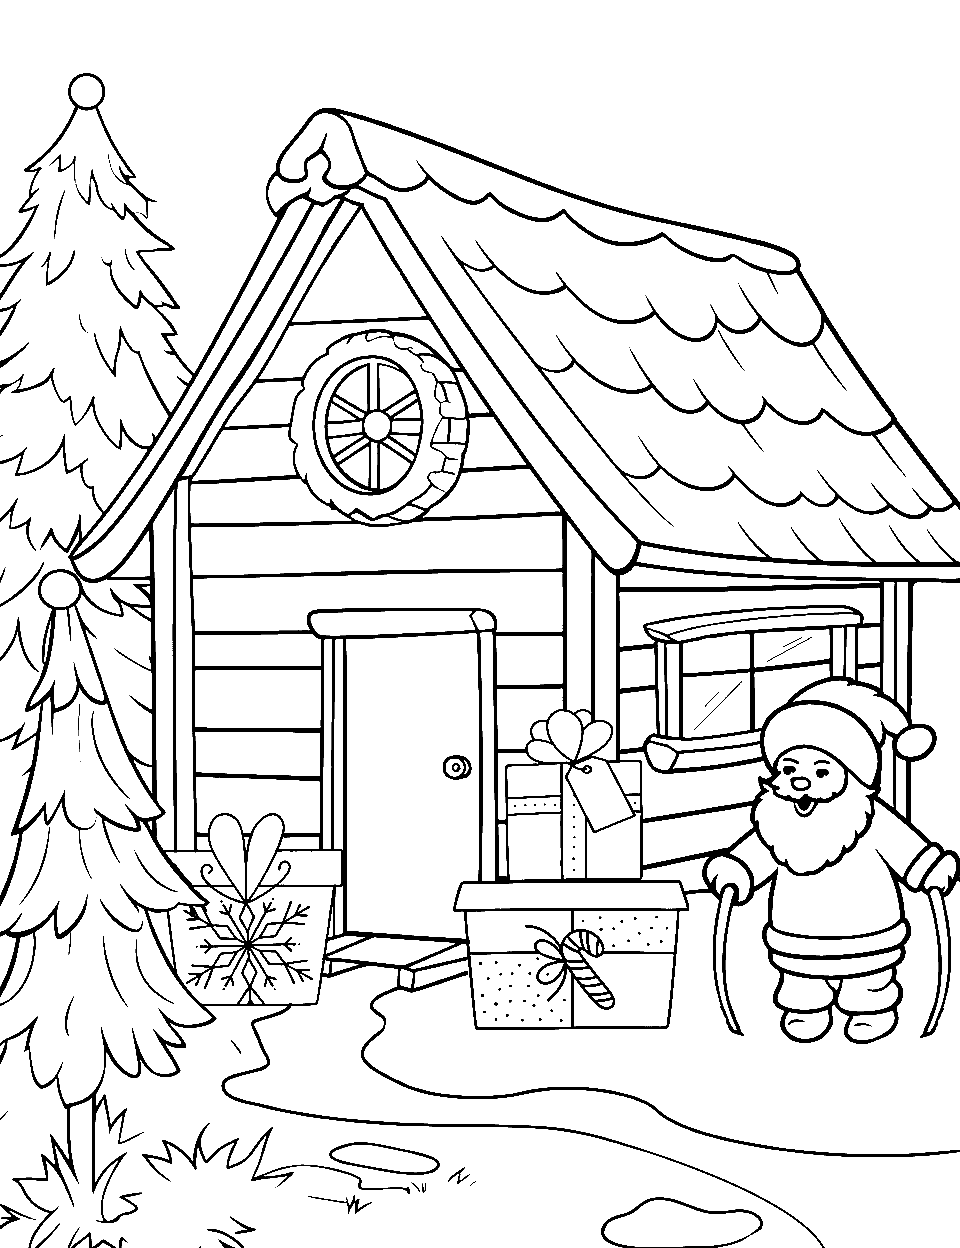 Santa Outside Cabin Coloring Page - Santa standing with gifts outside a cozy log cabin.